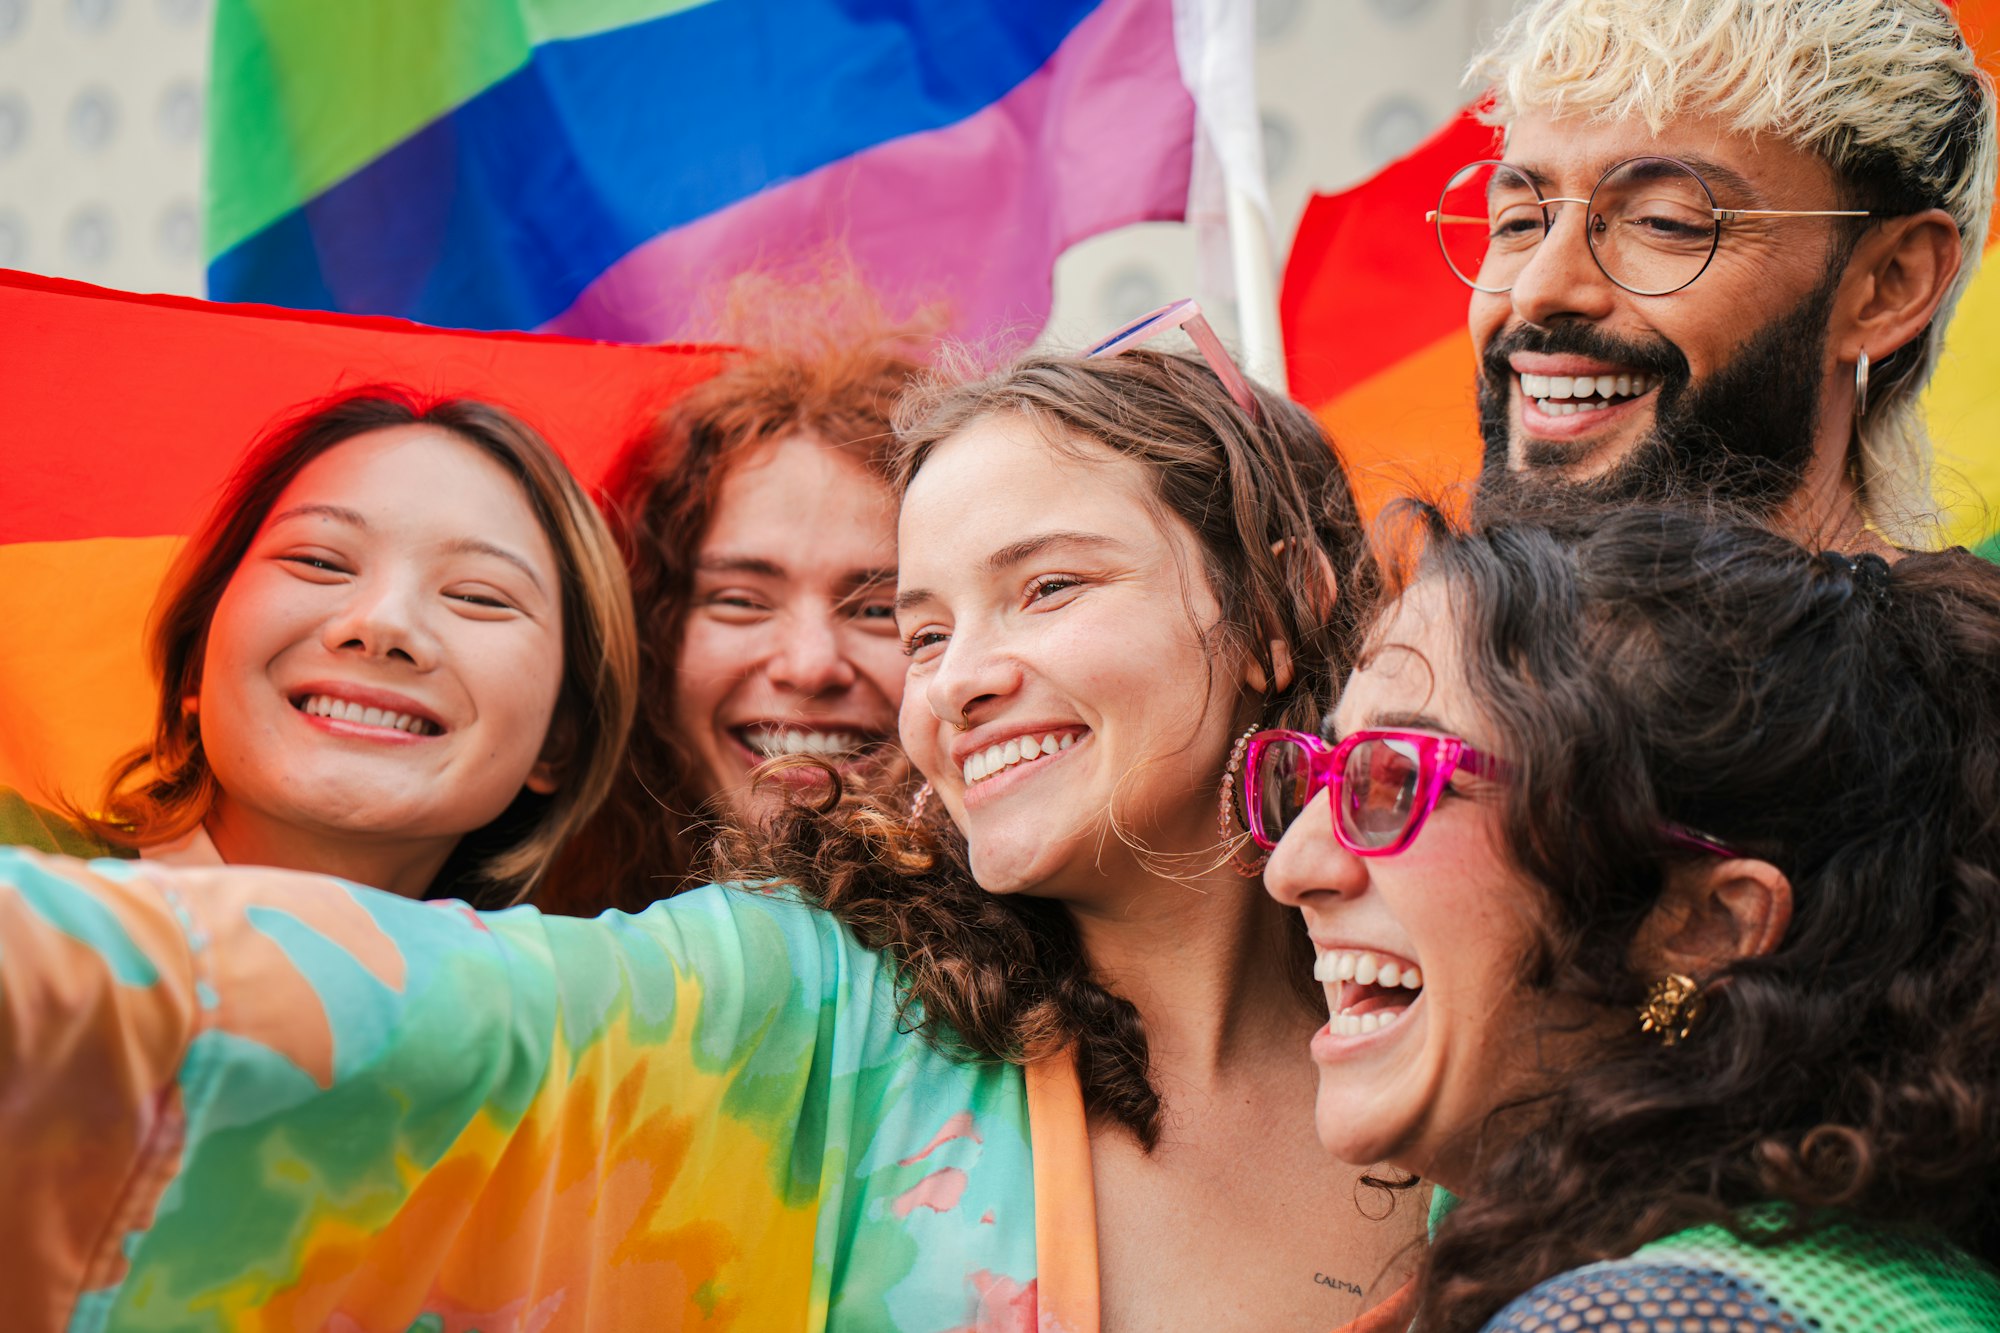 Close up portrait of a group of LGBT poeple having fun celebrating the gay pride day with a rainbow